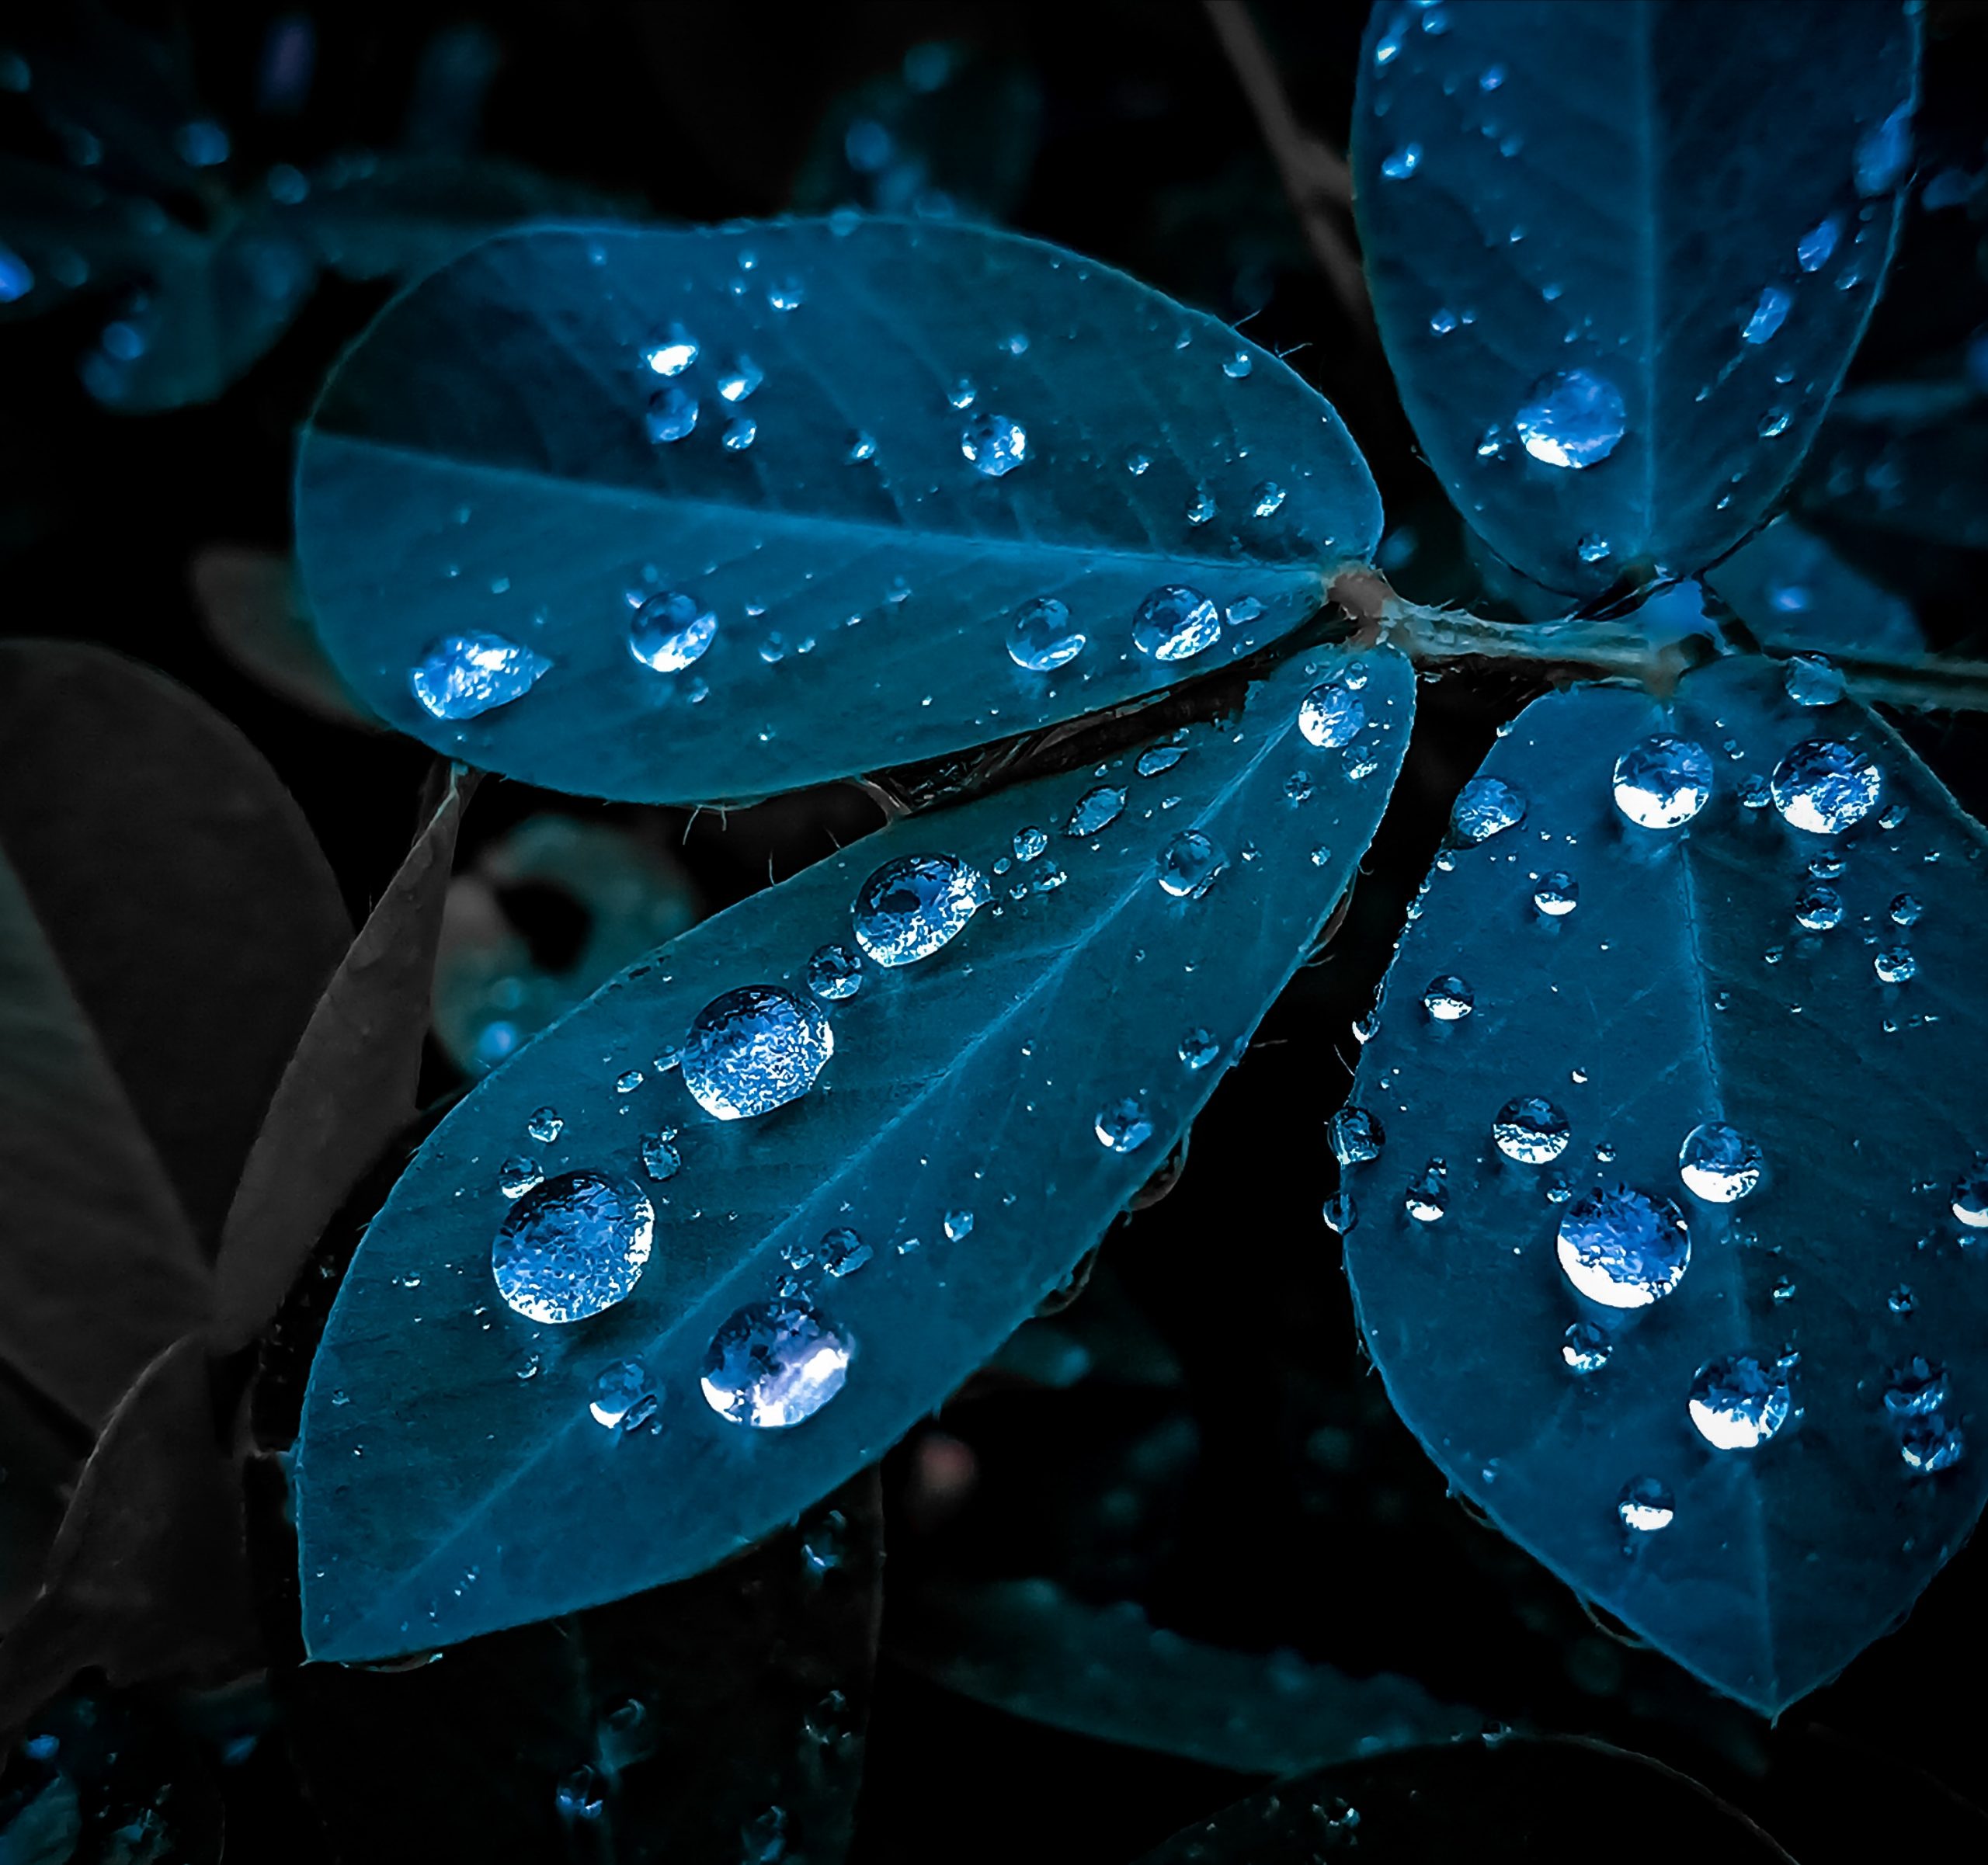 Dew drops on a plant leaves